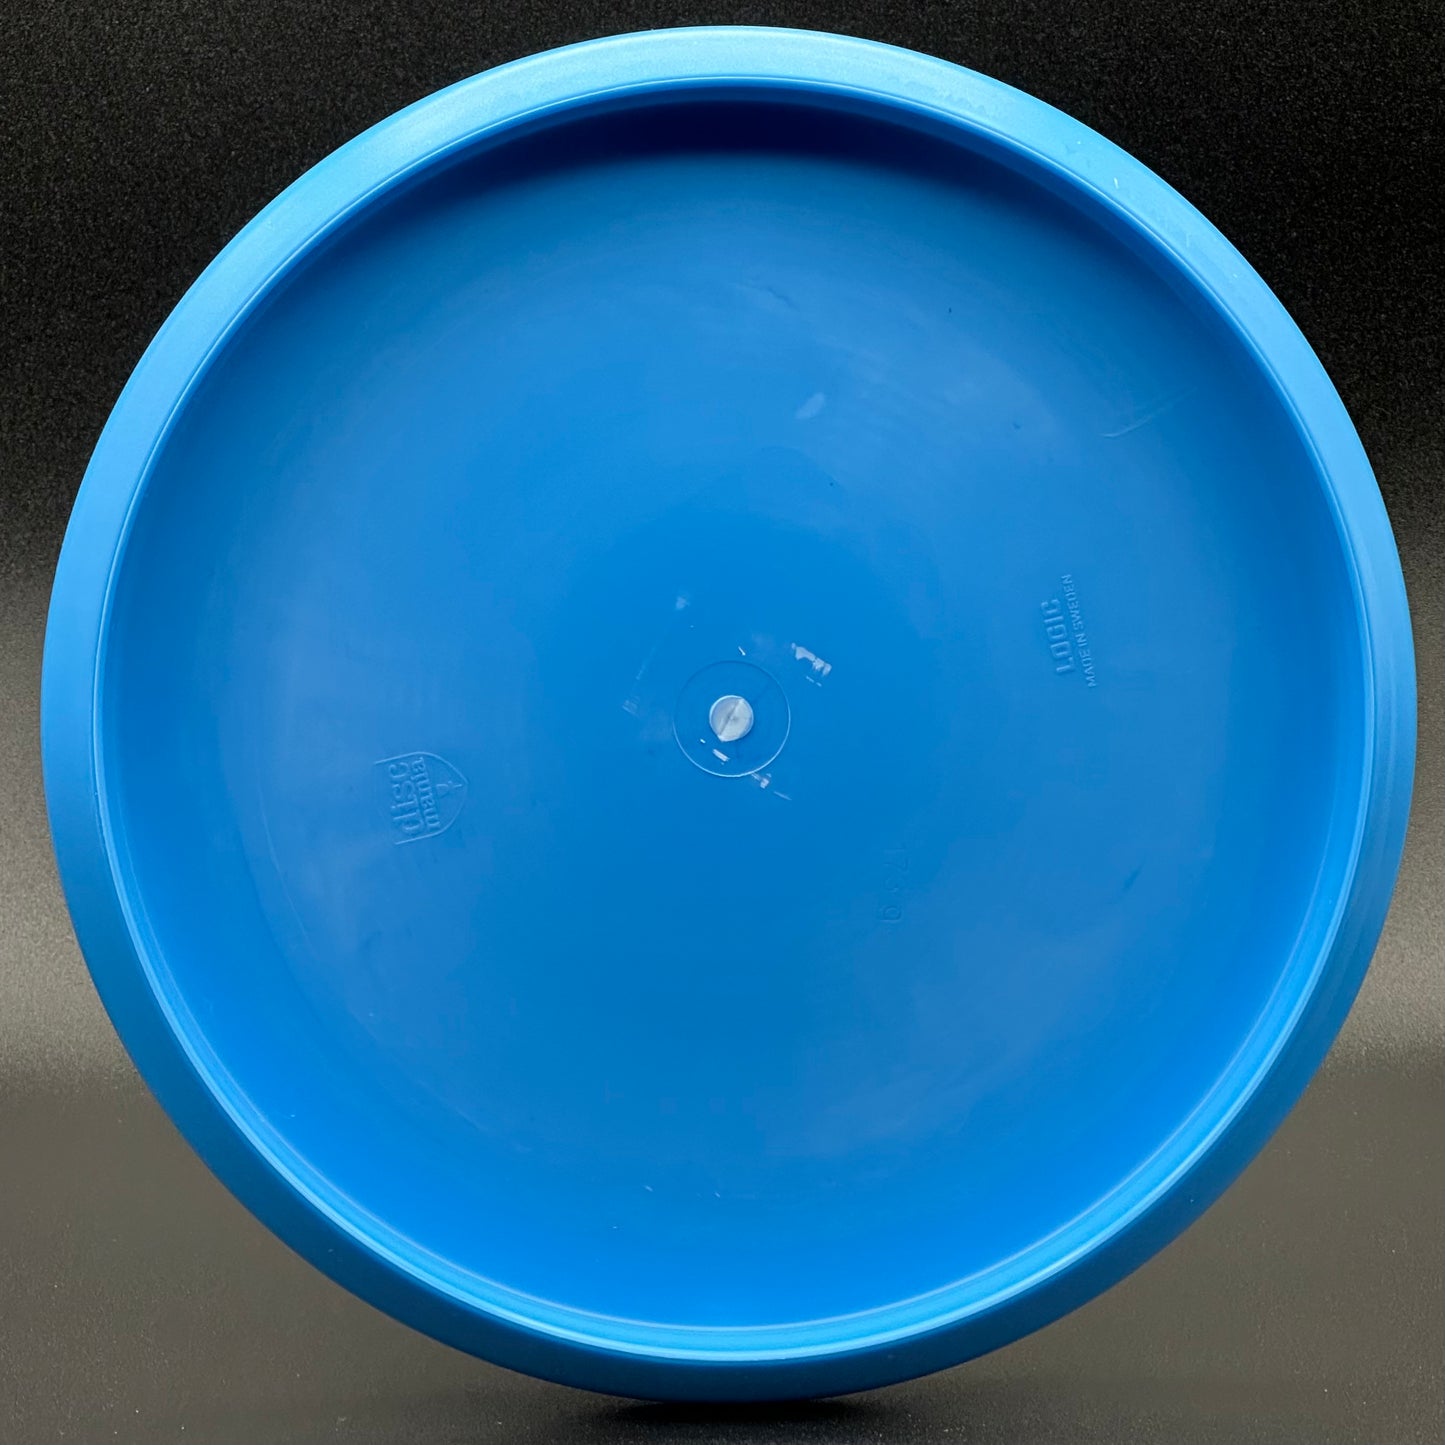 Discmania Limited Edition Simon Lizotte Bar Stamp (Variety of molds)